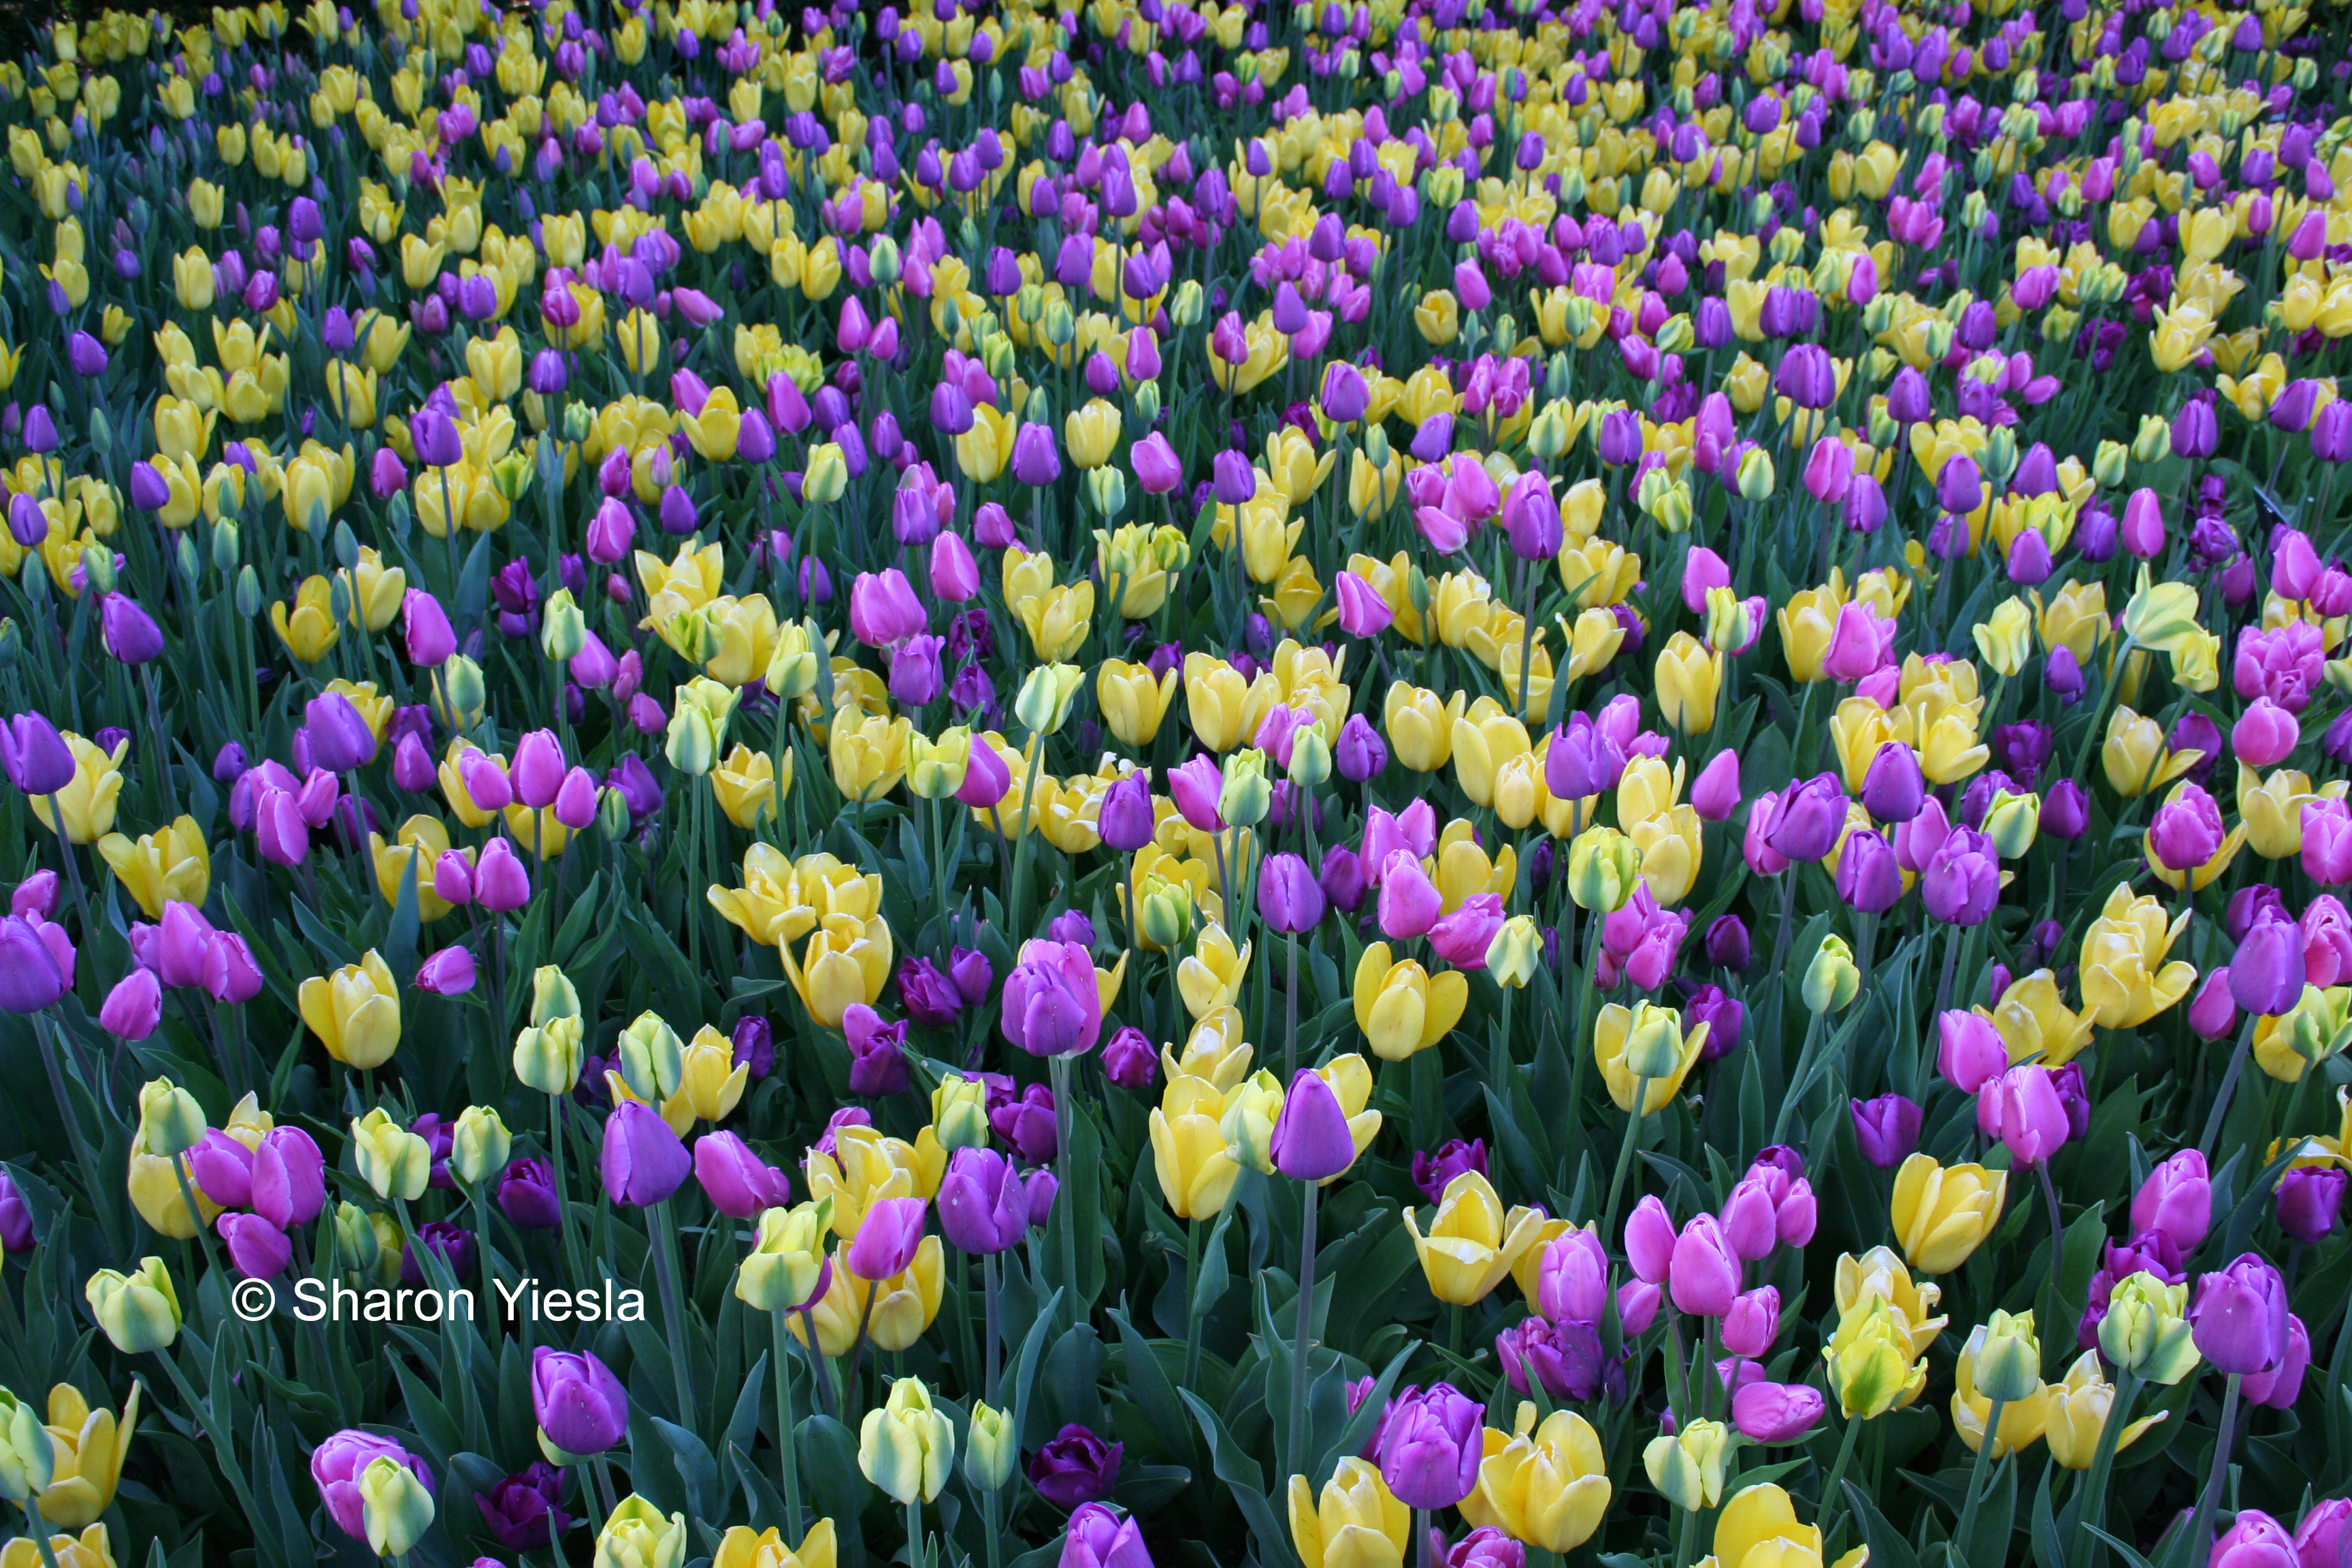 A large group of purple and yellow tulips